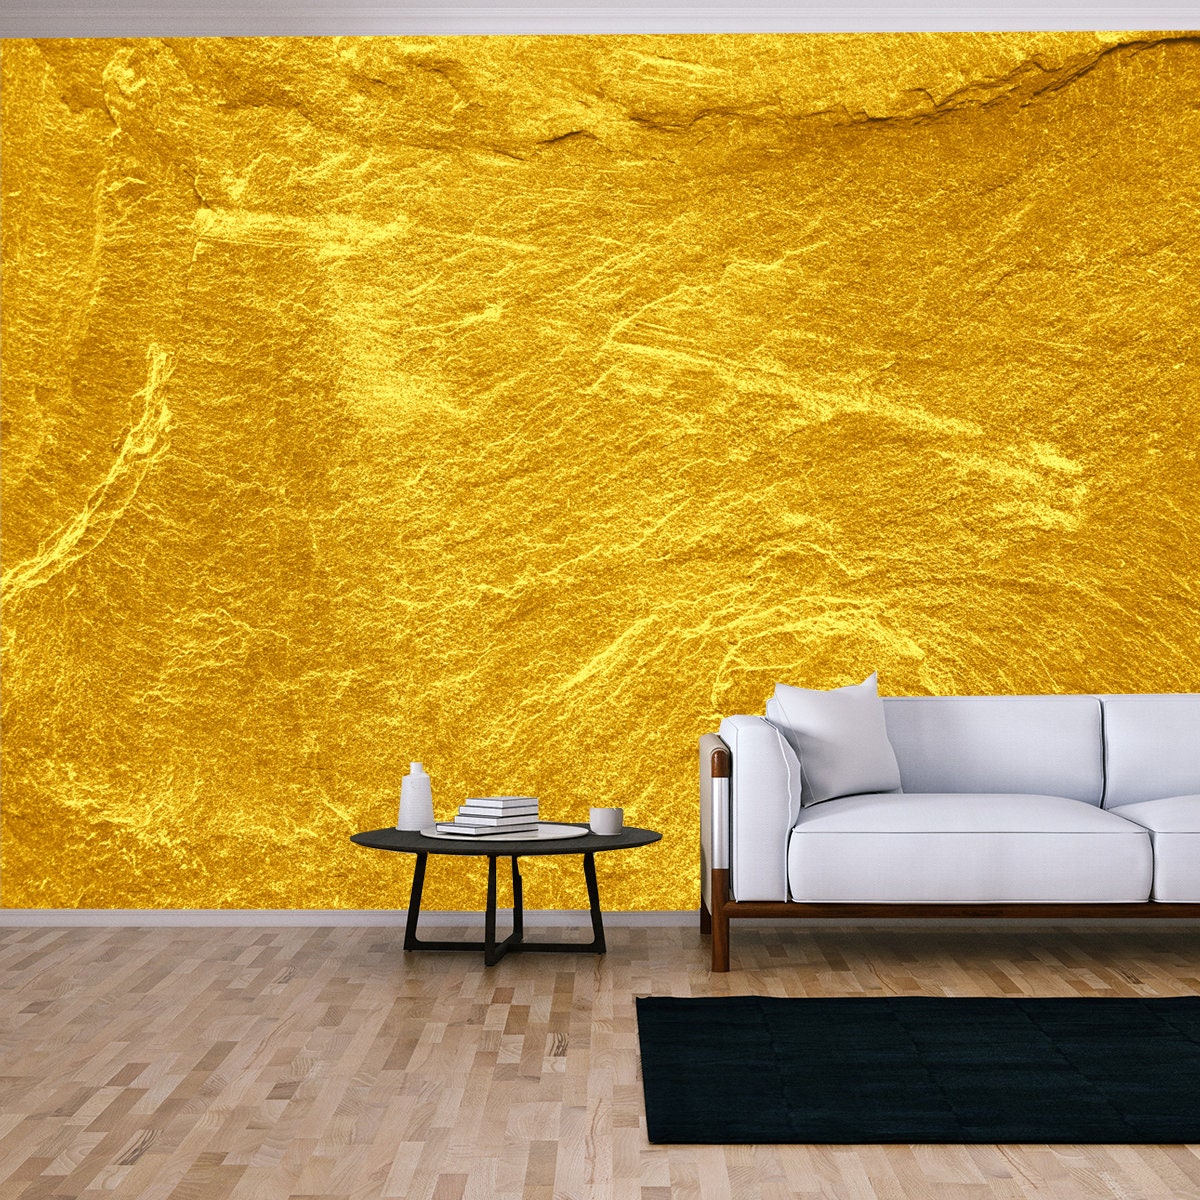 Gold Stone Texture for Background Wallpaper Living Room Mural